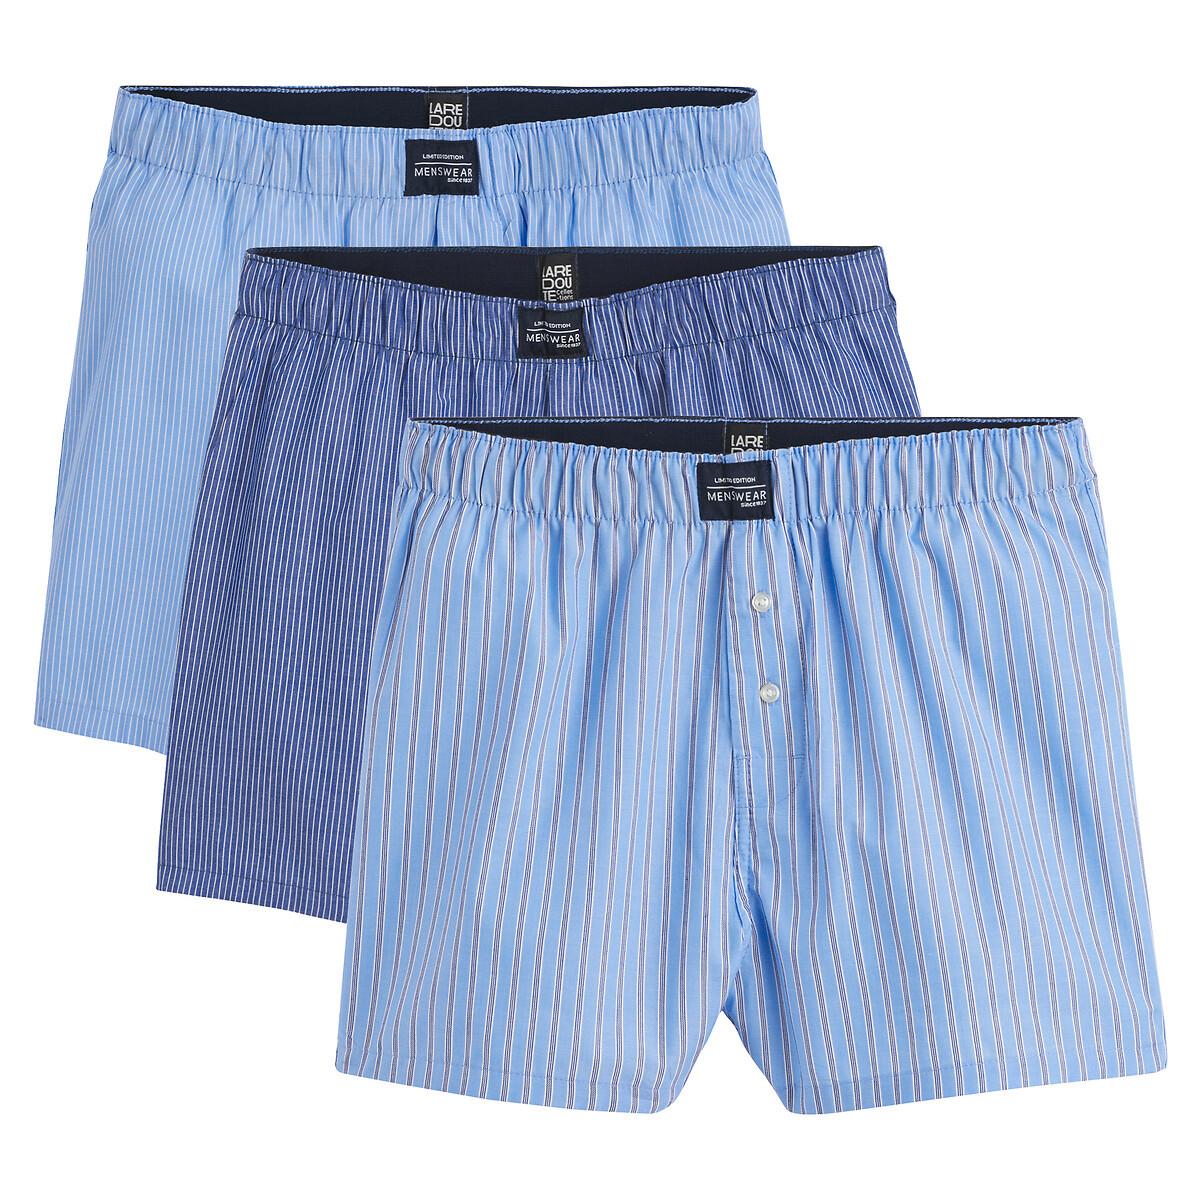 La Redoute Collections  3er-Pack gestreifte Boxershorts 